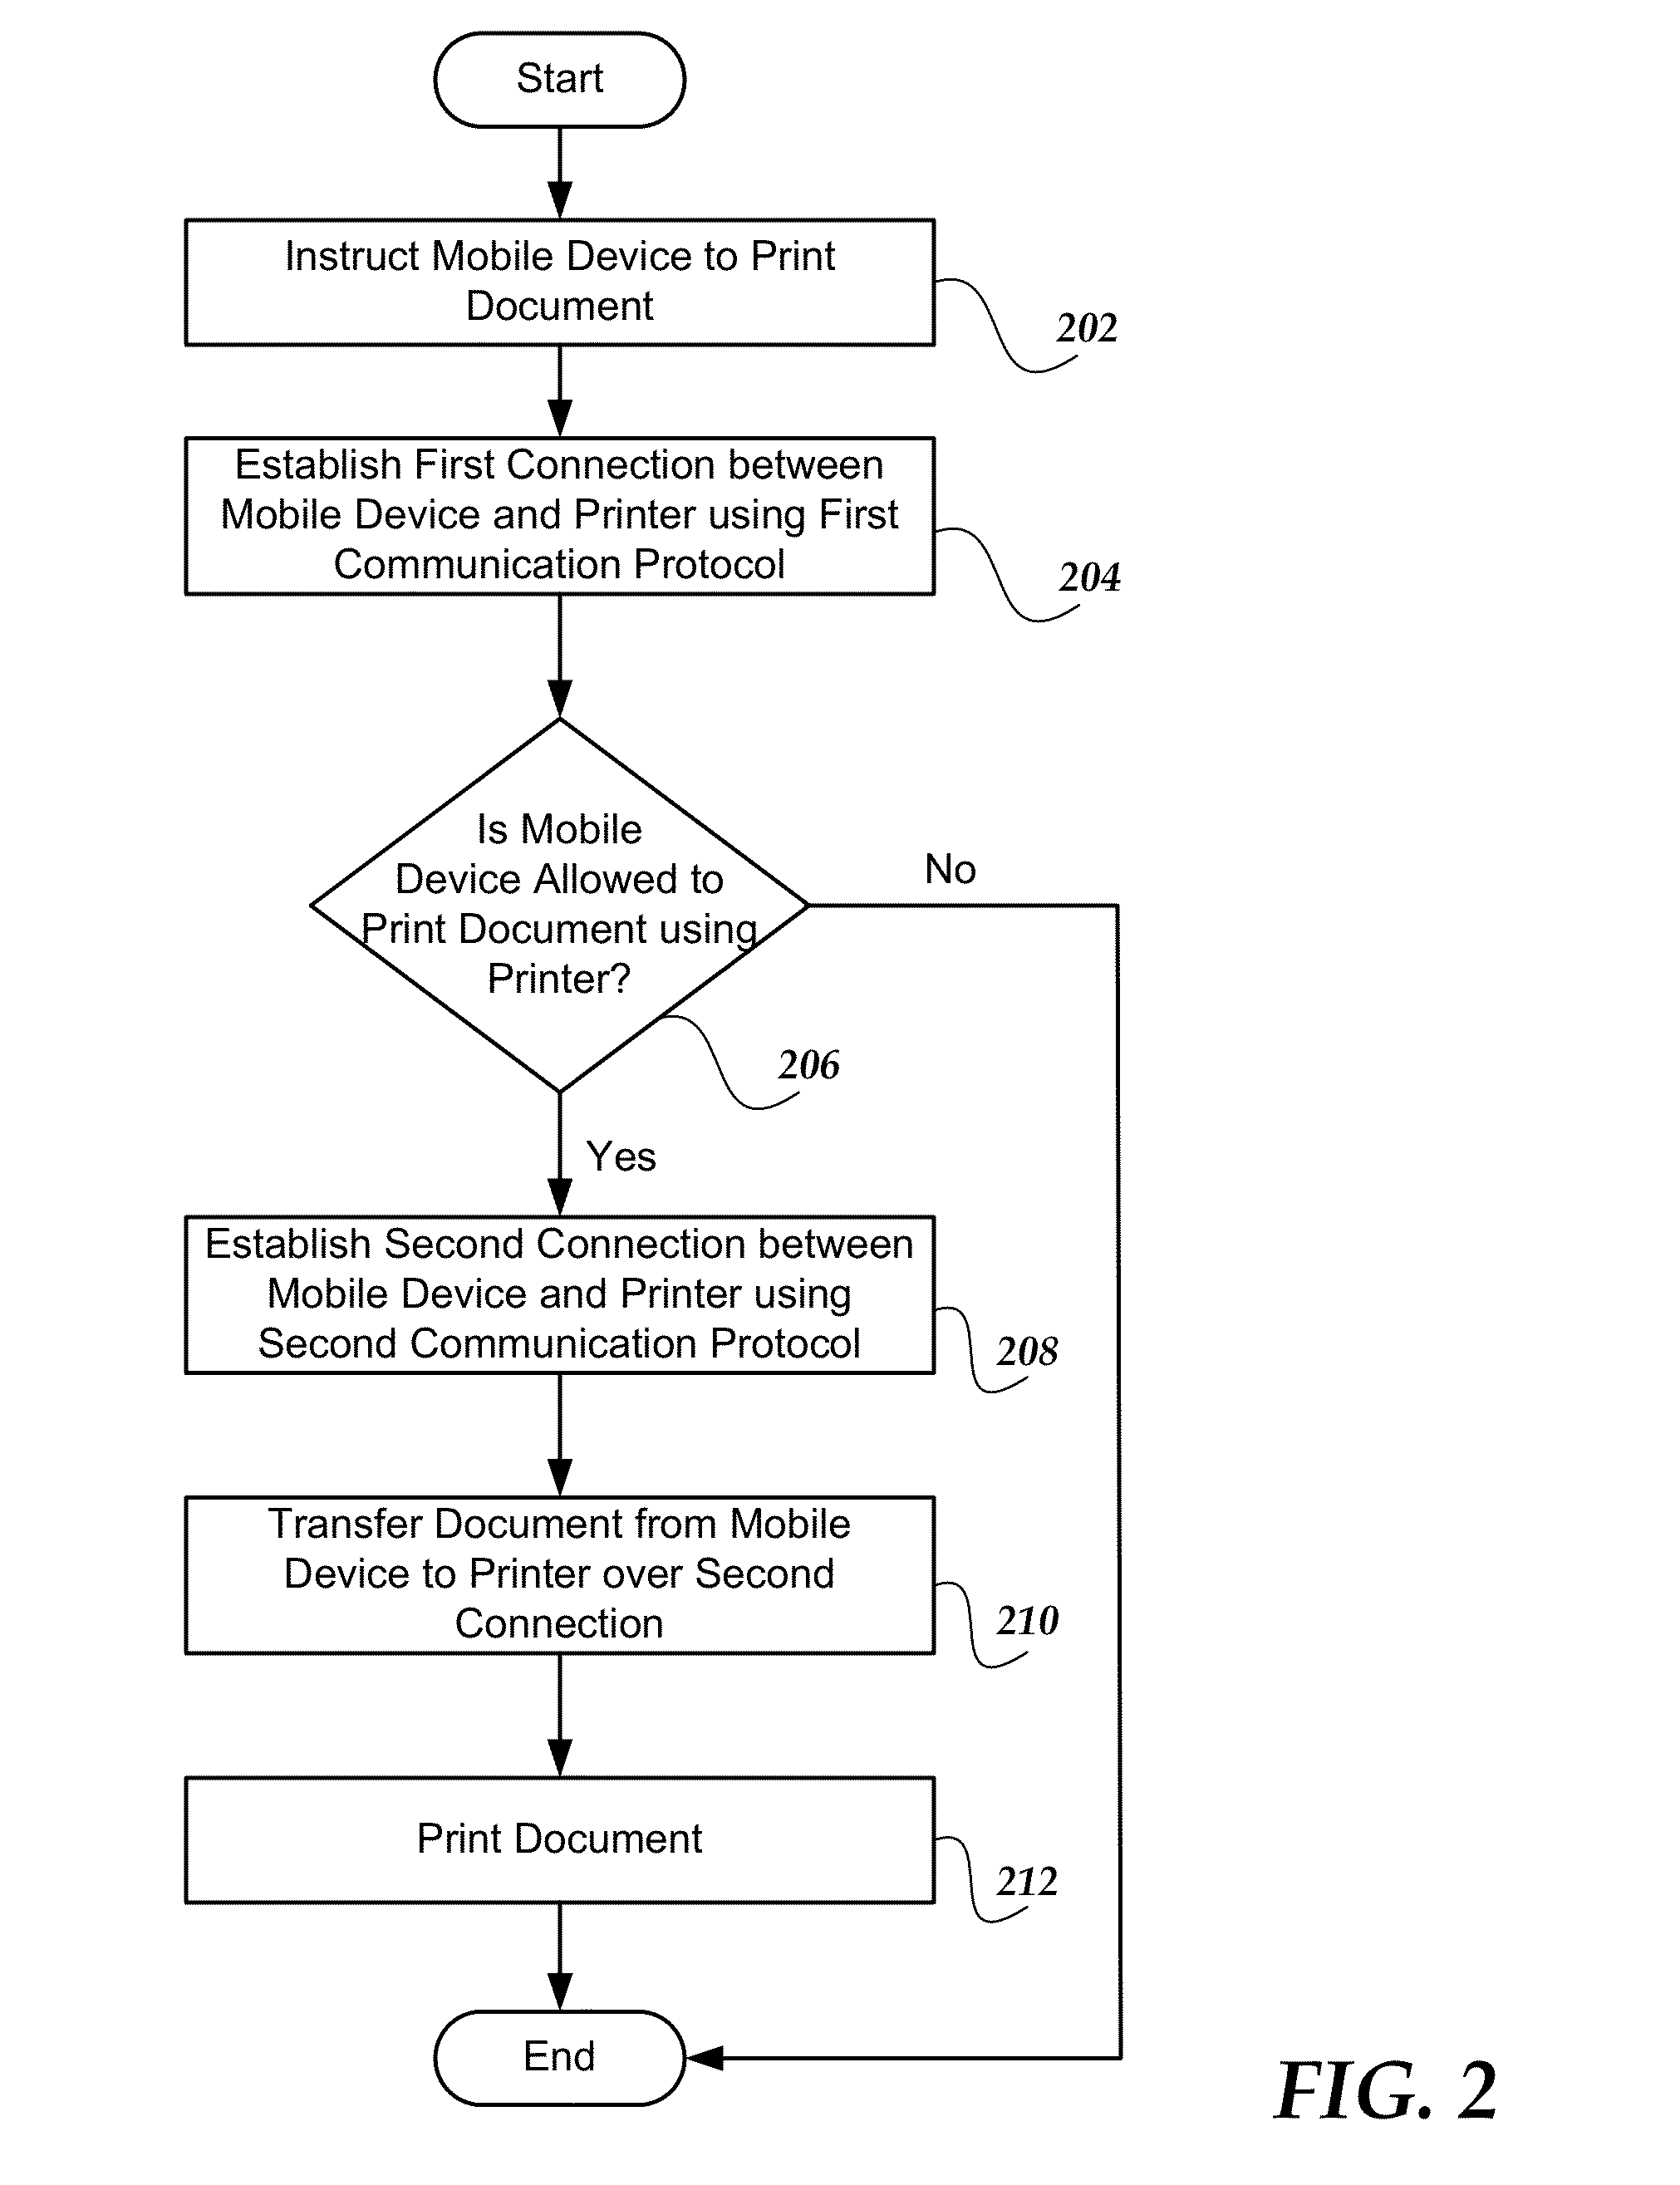 Systems and methods for printing documents using a mobile device